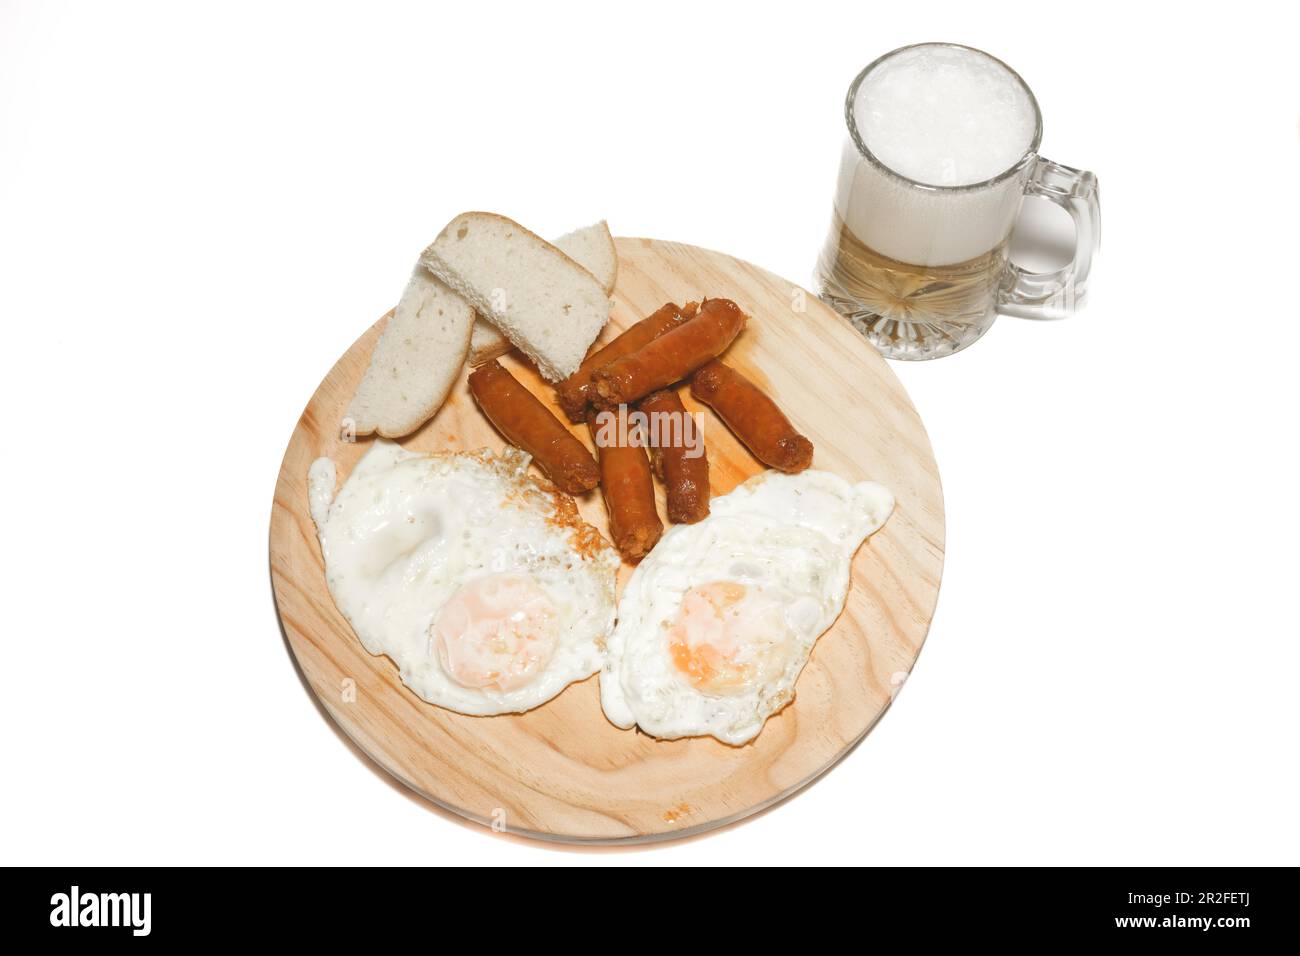 Typical spanish meal of fried eggs with sausage, bread and mug of beer isolated on white background and copy space Stock Photo